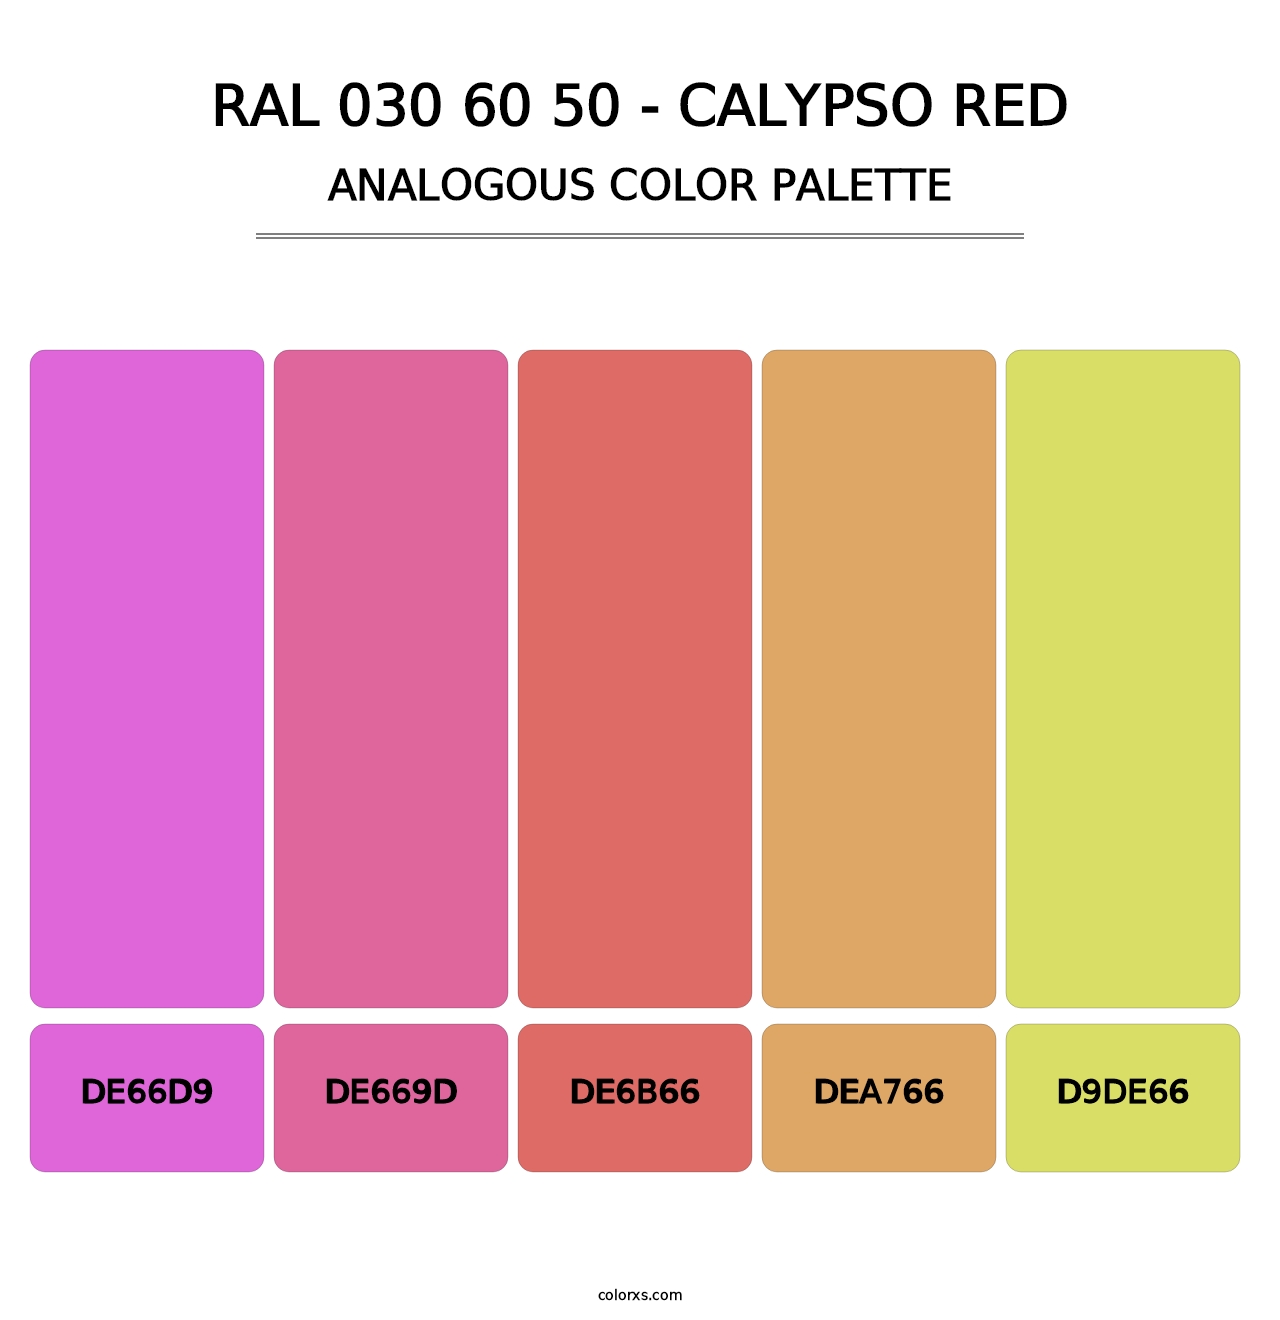 RAL 030 60 50 - Calypso Red - Analogous Color Palette